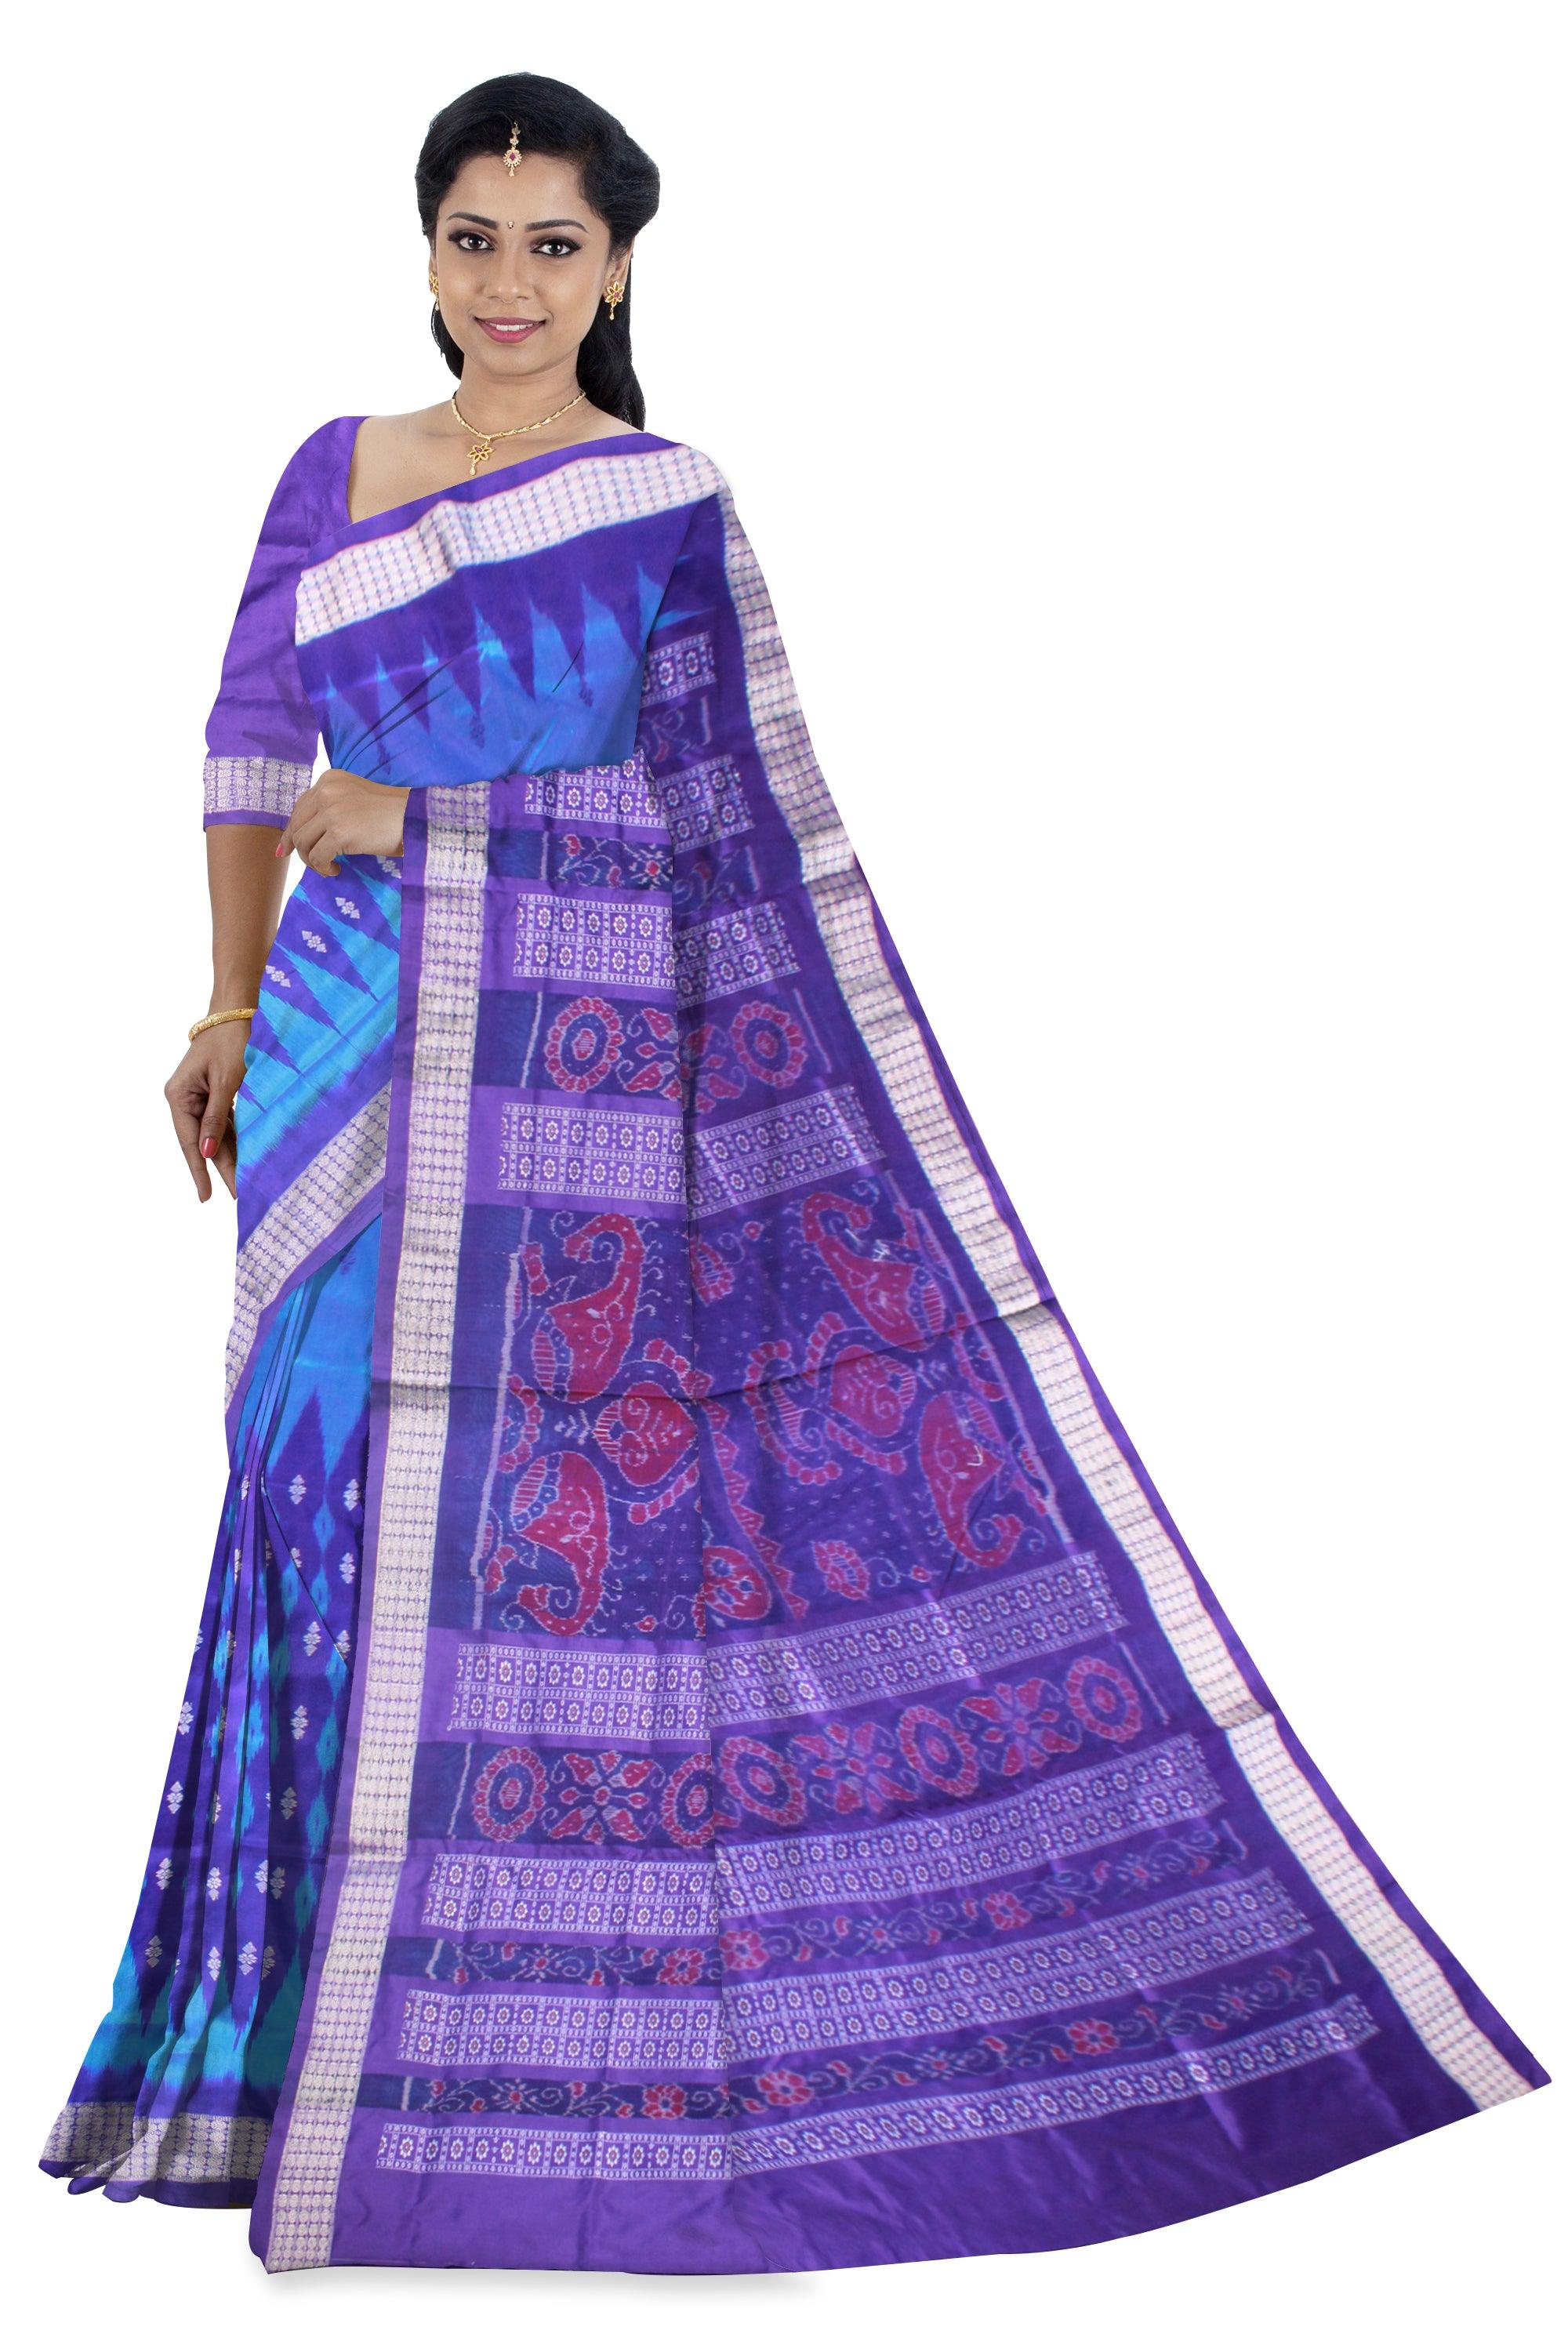 KUMBHA PATTERN PATA SAREE IS SKY AND LIGHT SKY COLOR BASE,COMES WITH MATCHING BLOUSE PIECE. - Koshali Arts & Crafts Enterprise